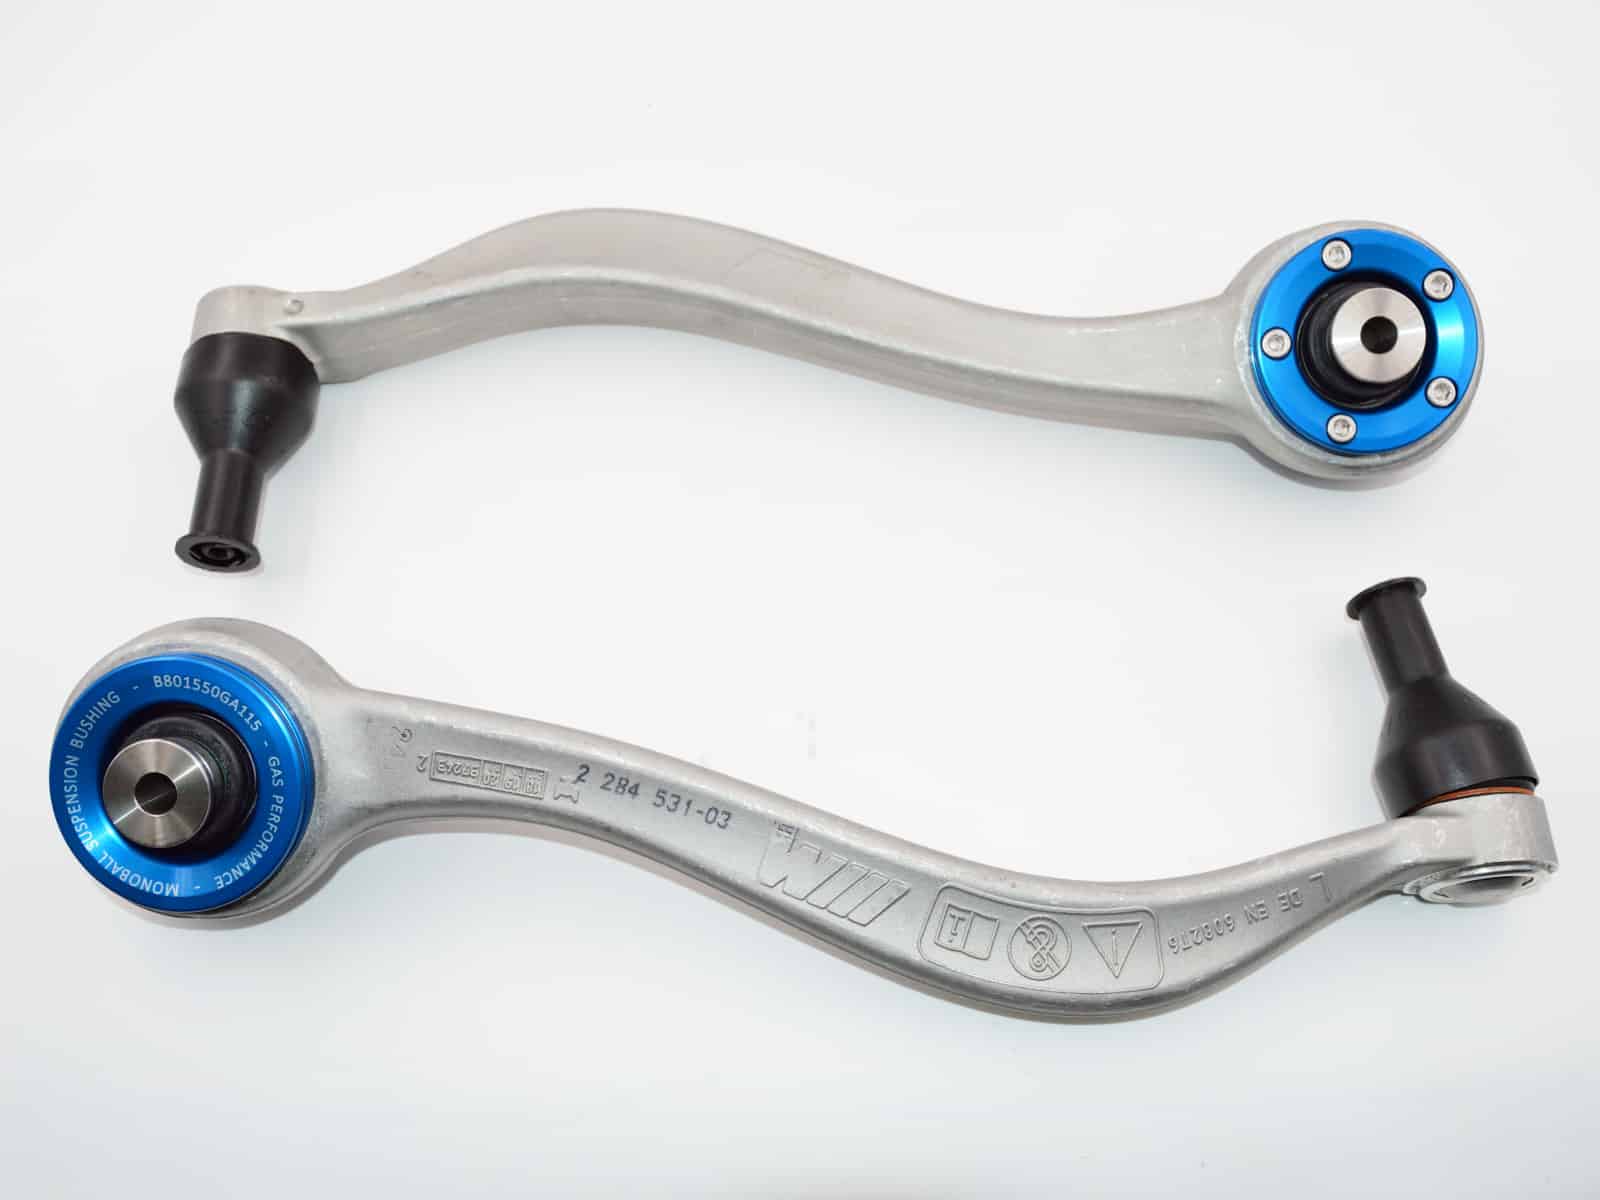 GAS BMW F80 Series Monoballs Pre-installed into New Control Arms